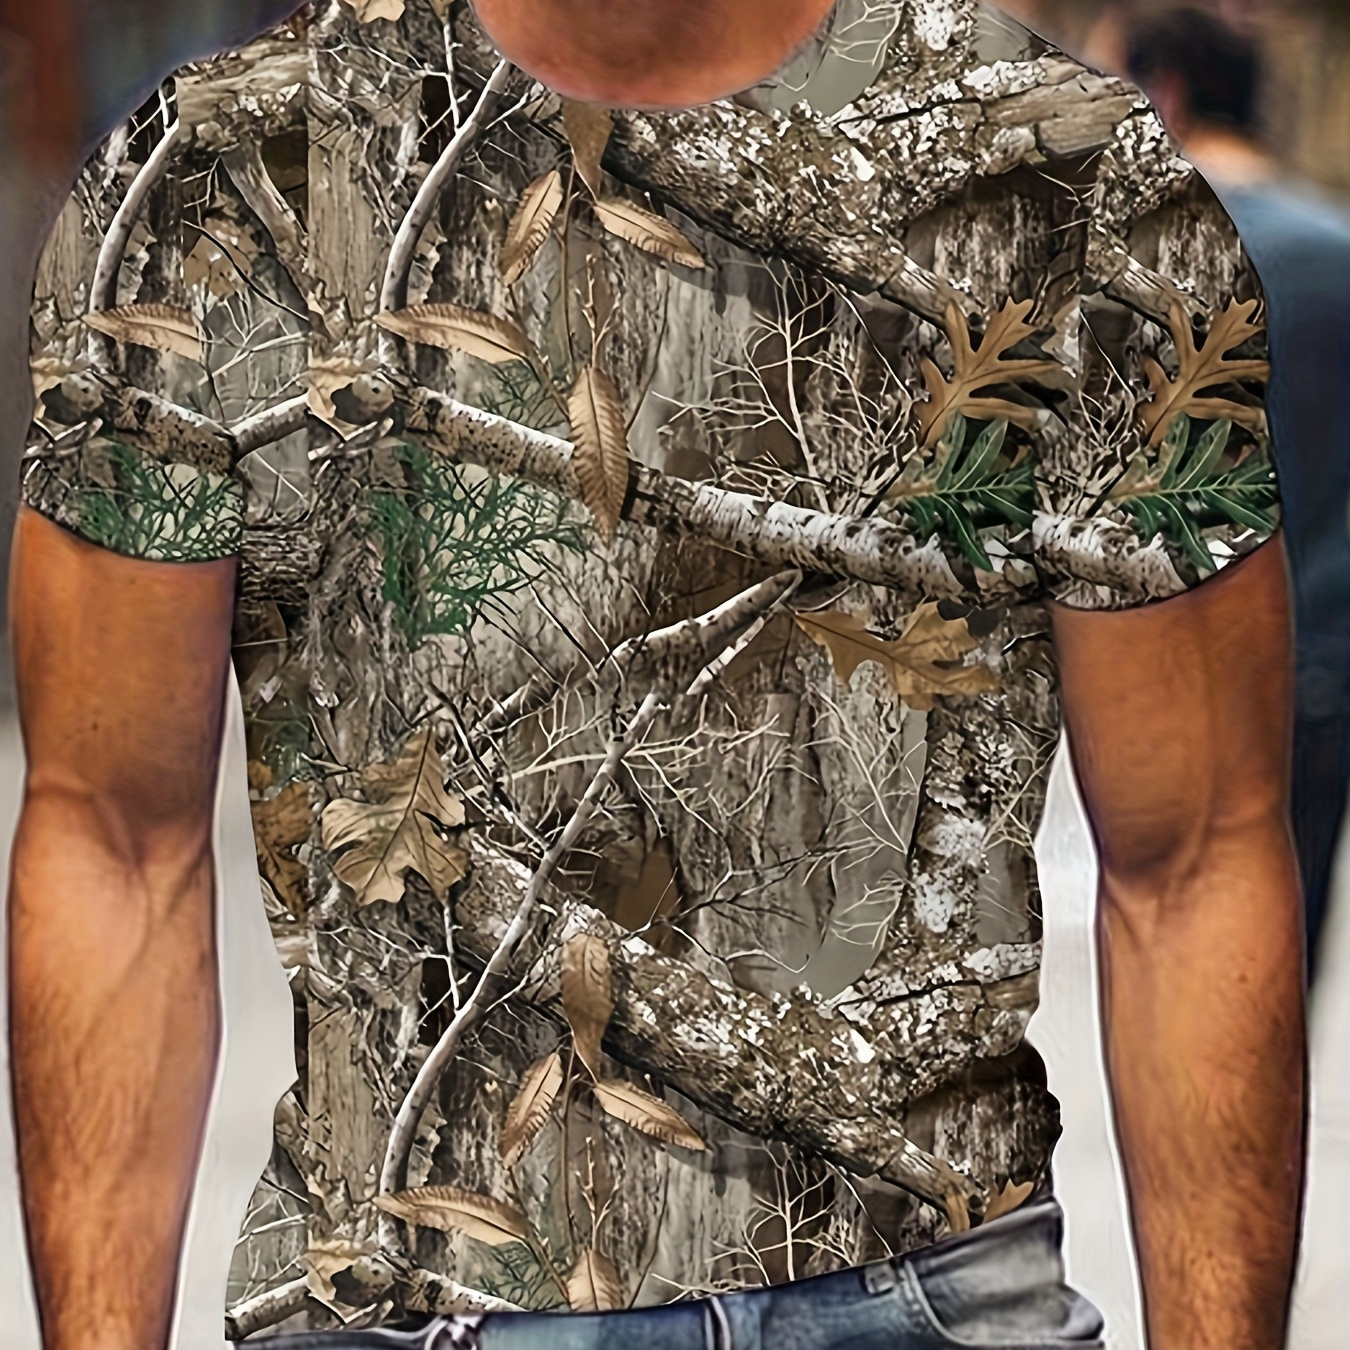 

Men's Summer Sports Camouflage T-shirt, Digital Leaf Camouflage Print Short Sleeve Top, Casual Outdoor Wear In Athletic Style